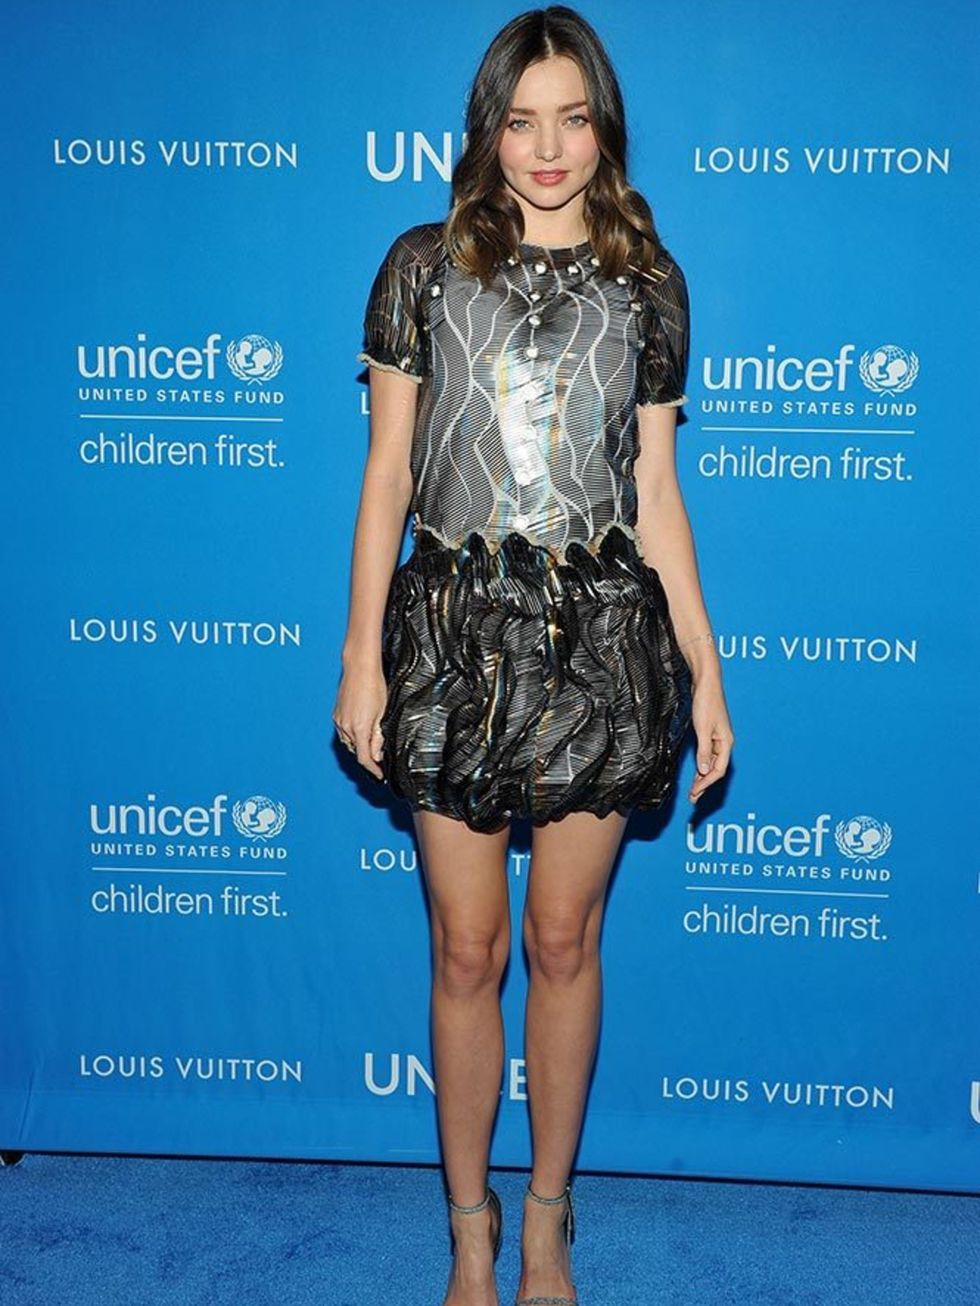 LOUIS VUITTON FOR UNICEF - News